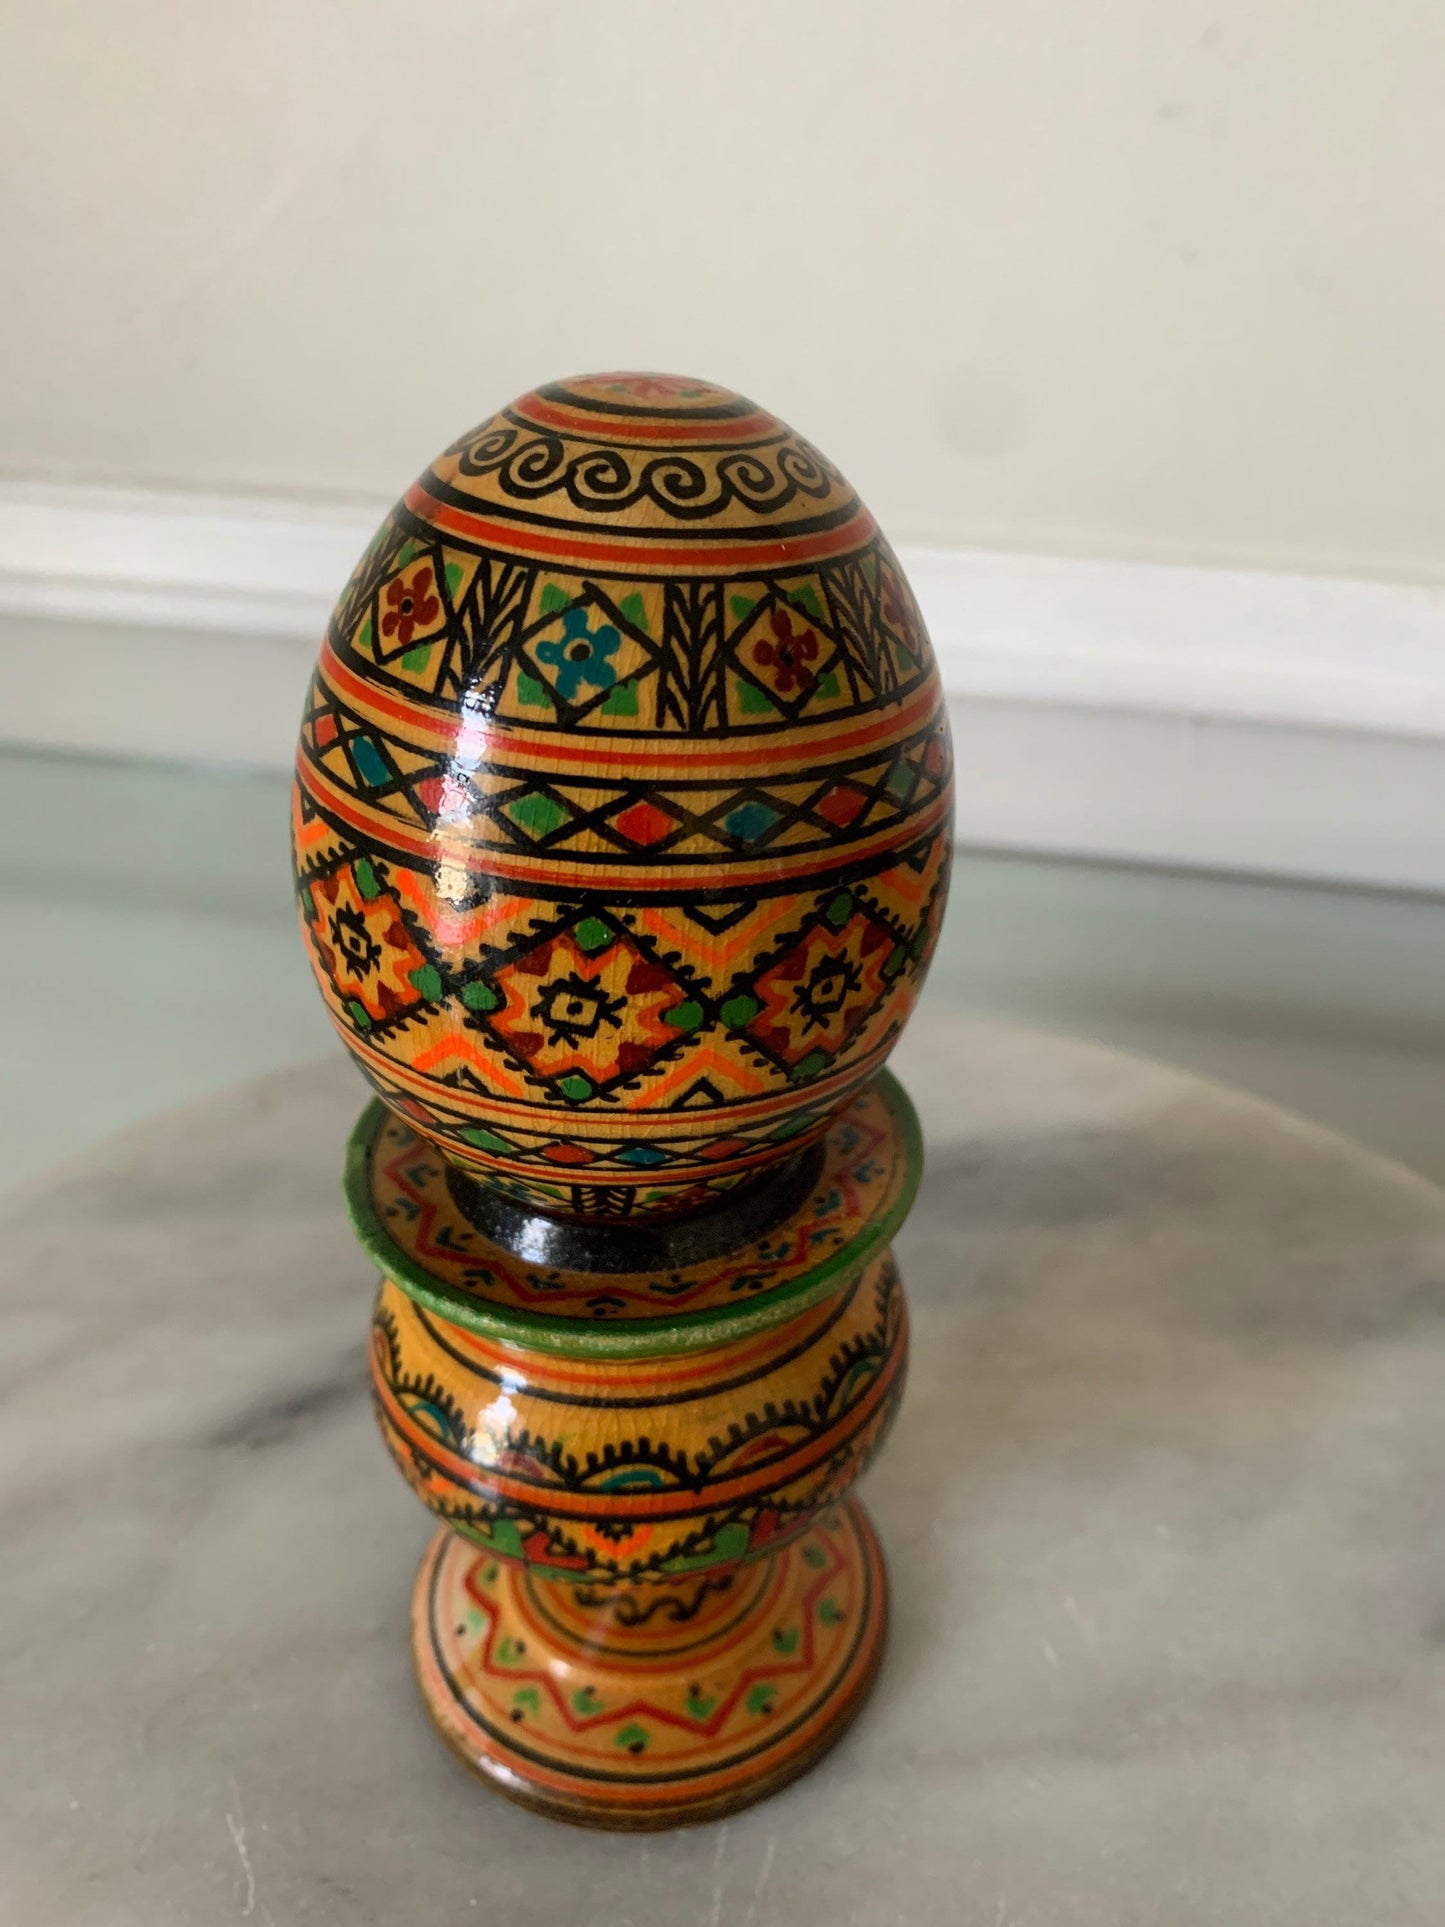 Large Vintage Hand Painted Wooden Egg with Stand